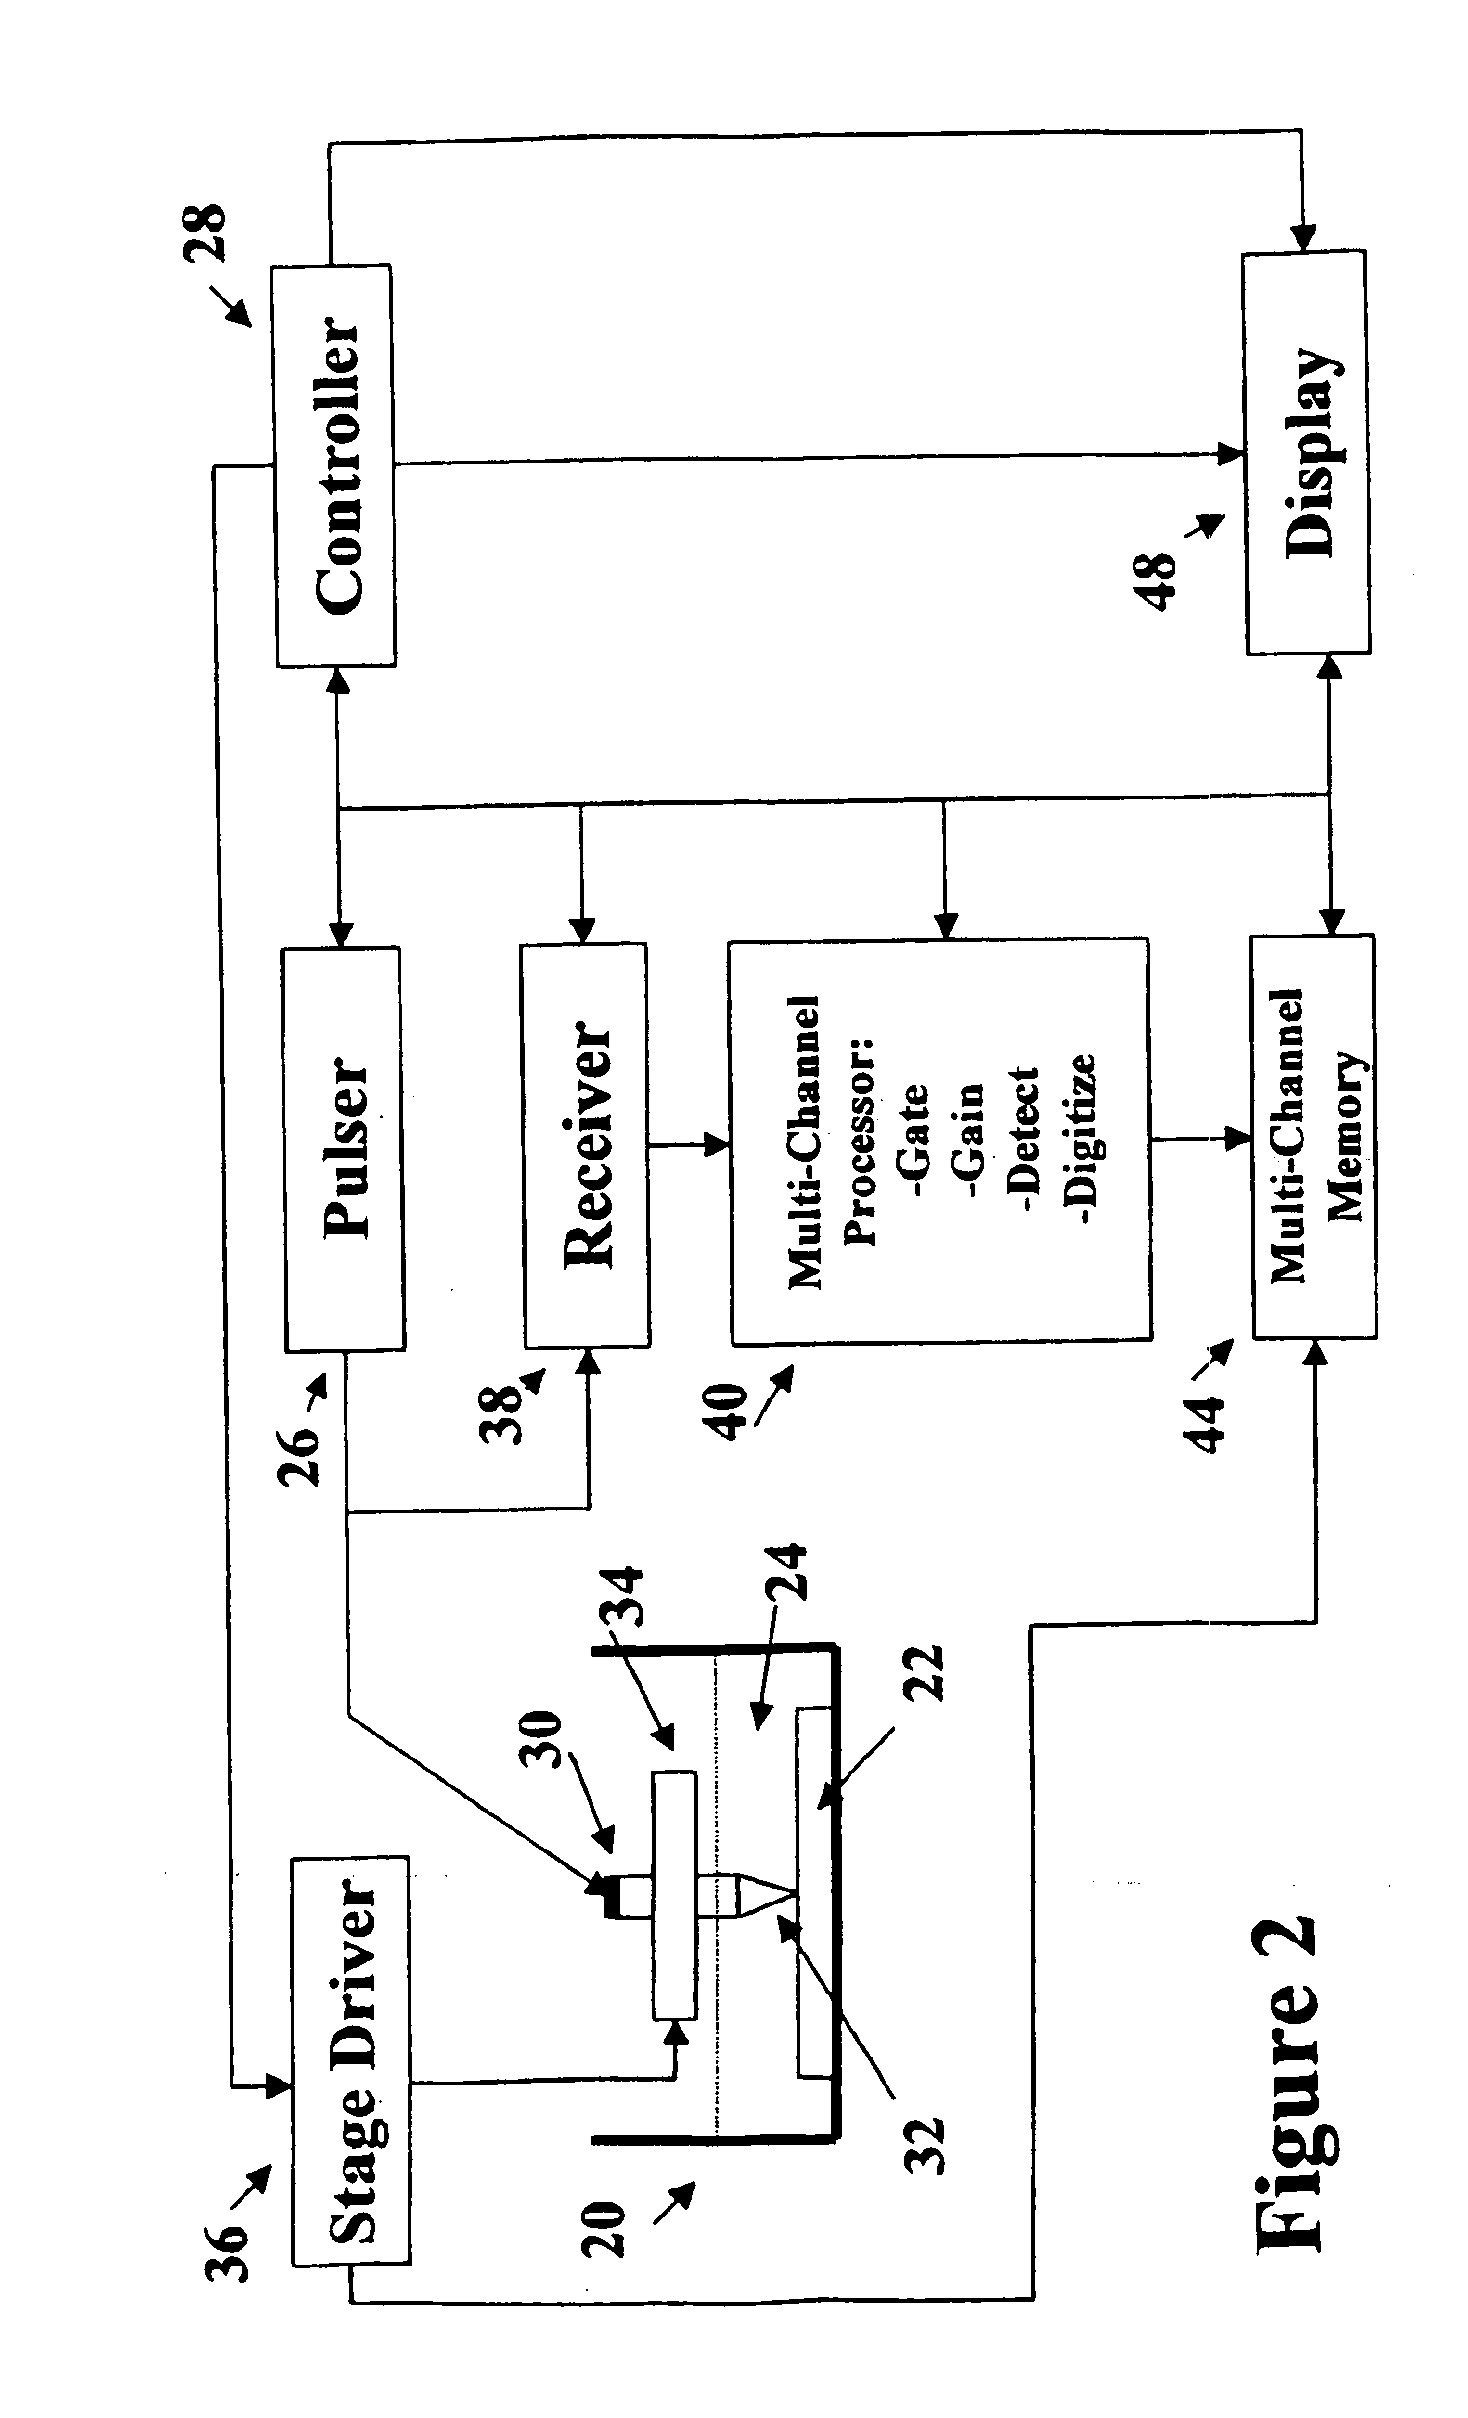 Acoustic micro imaging method providing improved information derivation and visualization